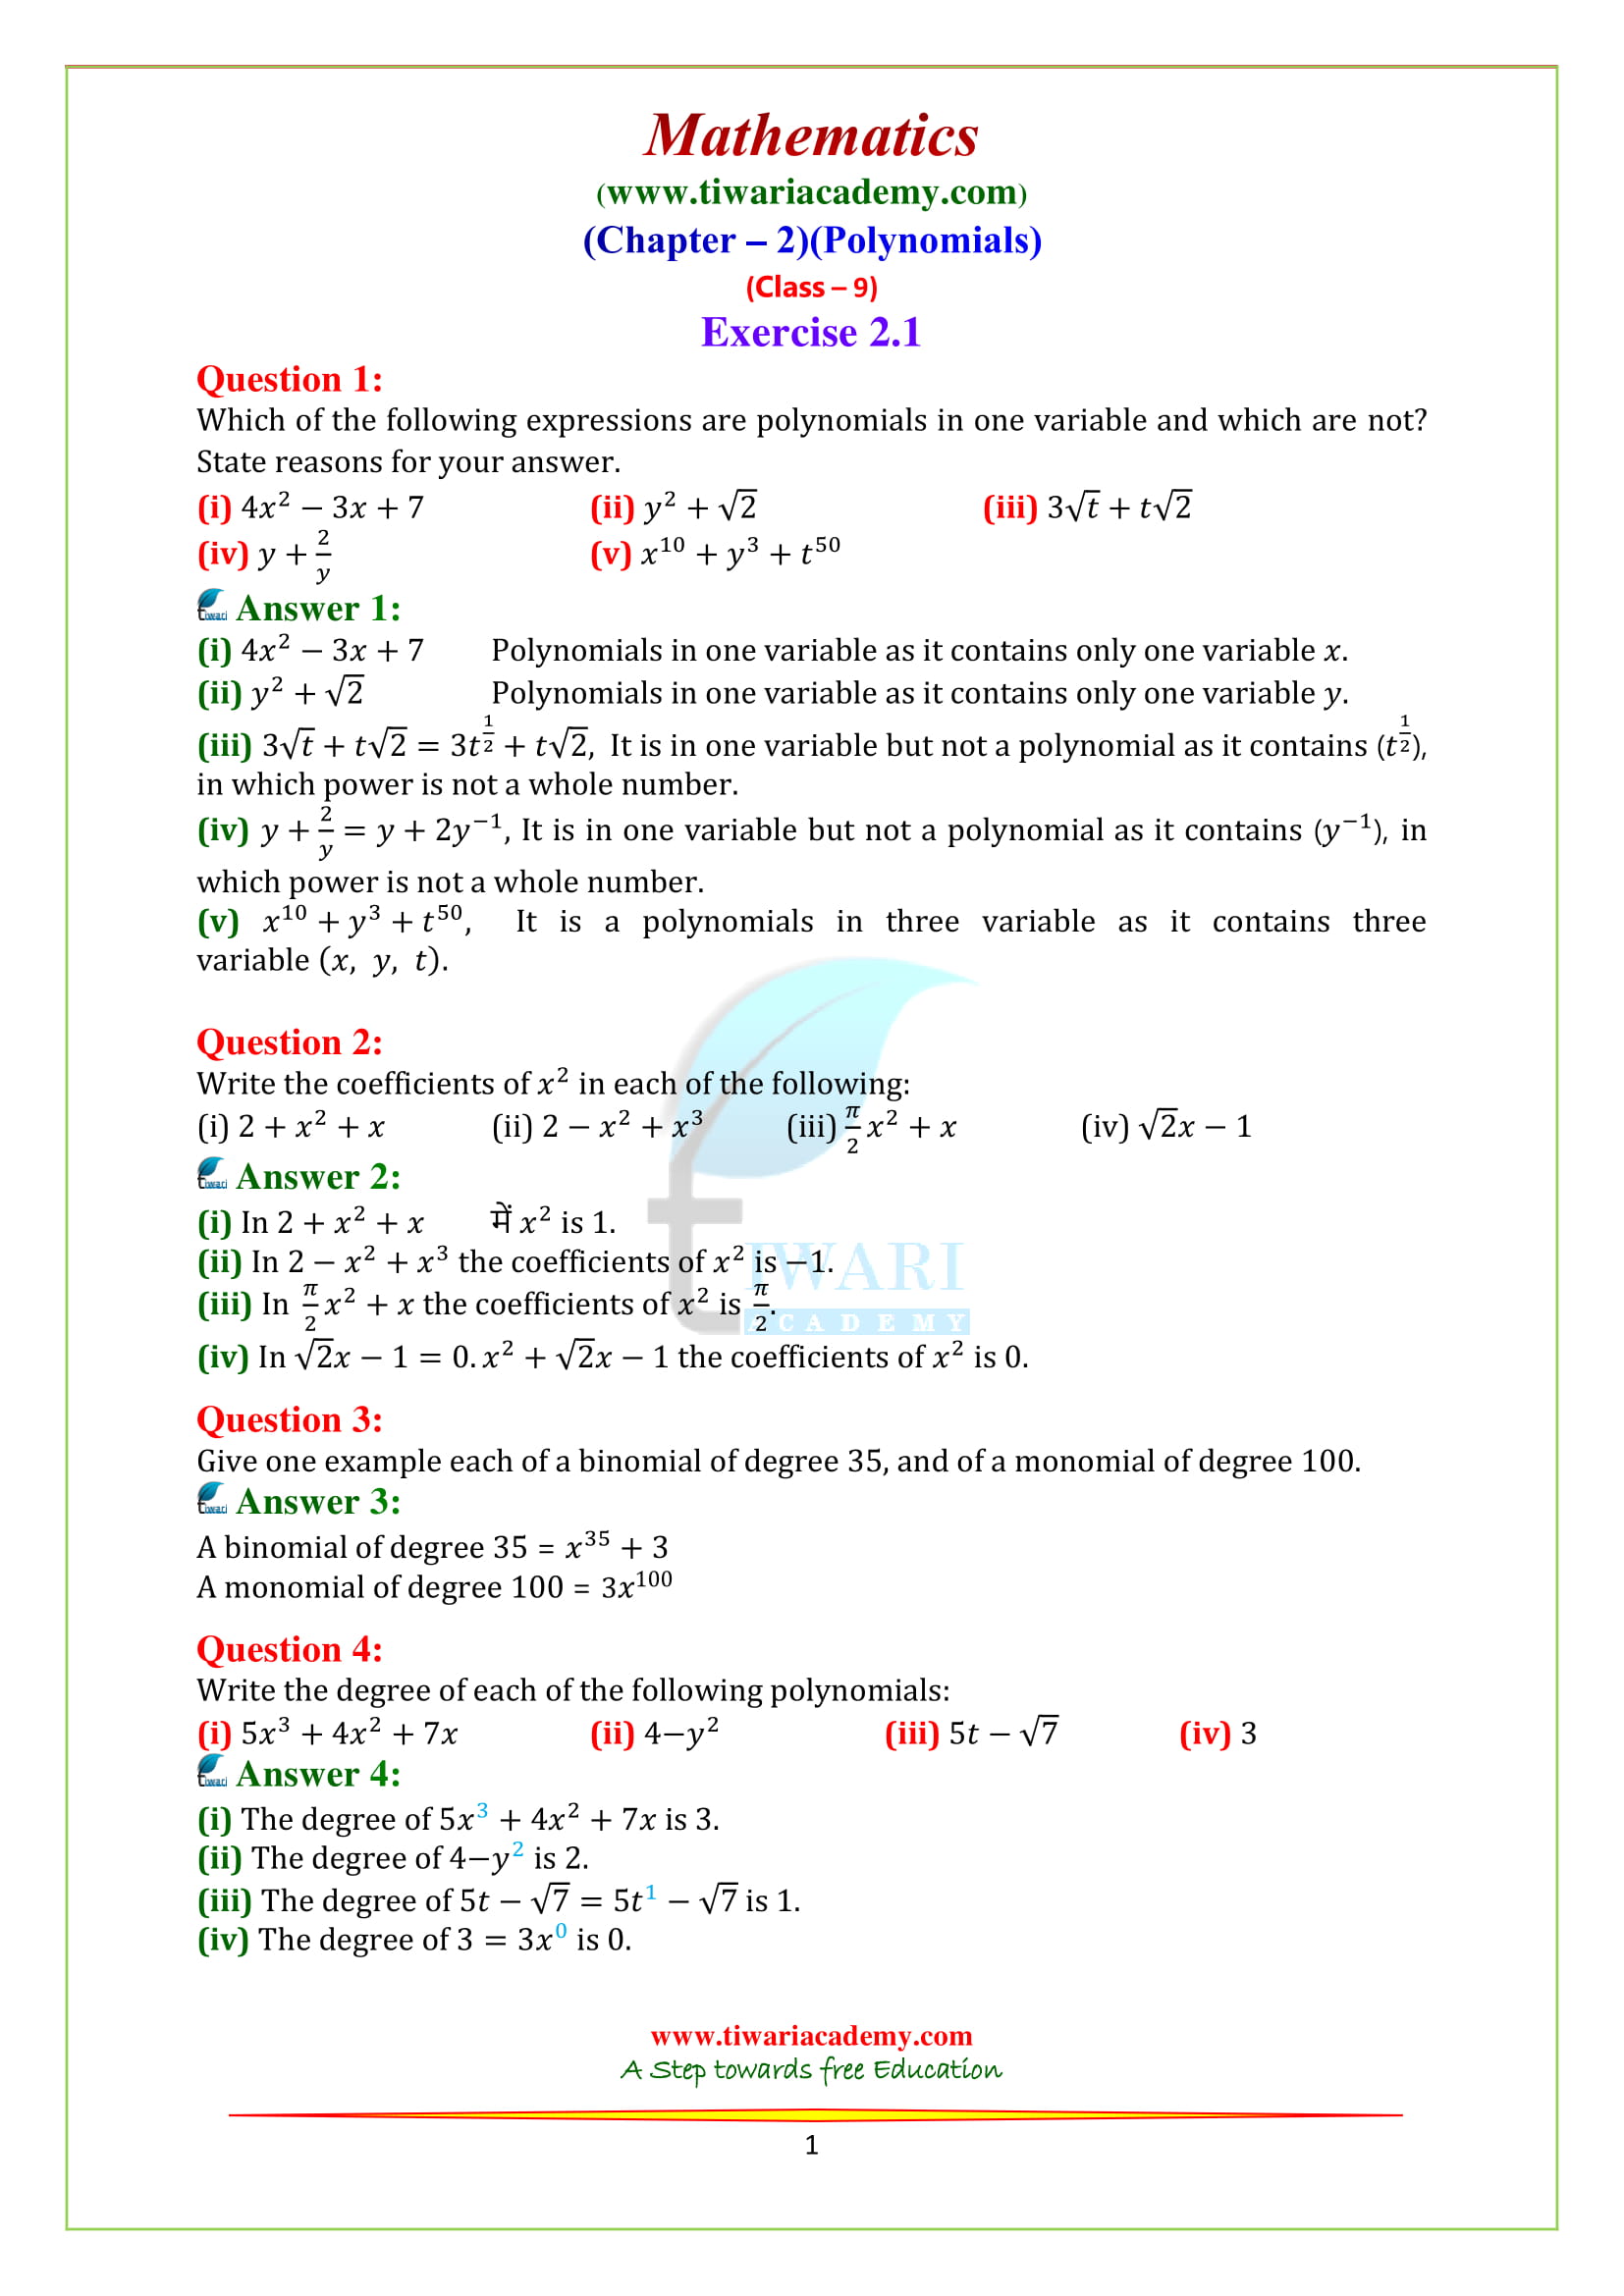 NCERT Solutions for Class 9 Maths Chapter 2 Exercise 2.1 Polynomials